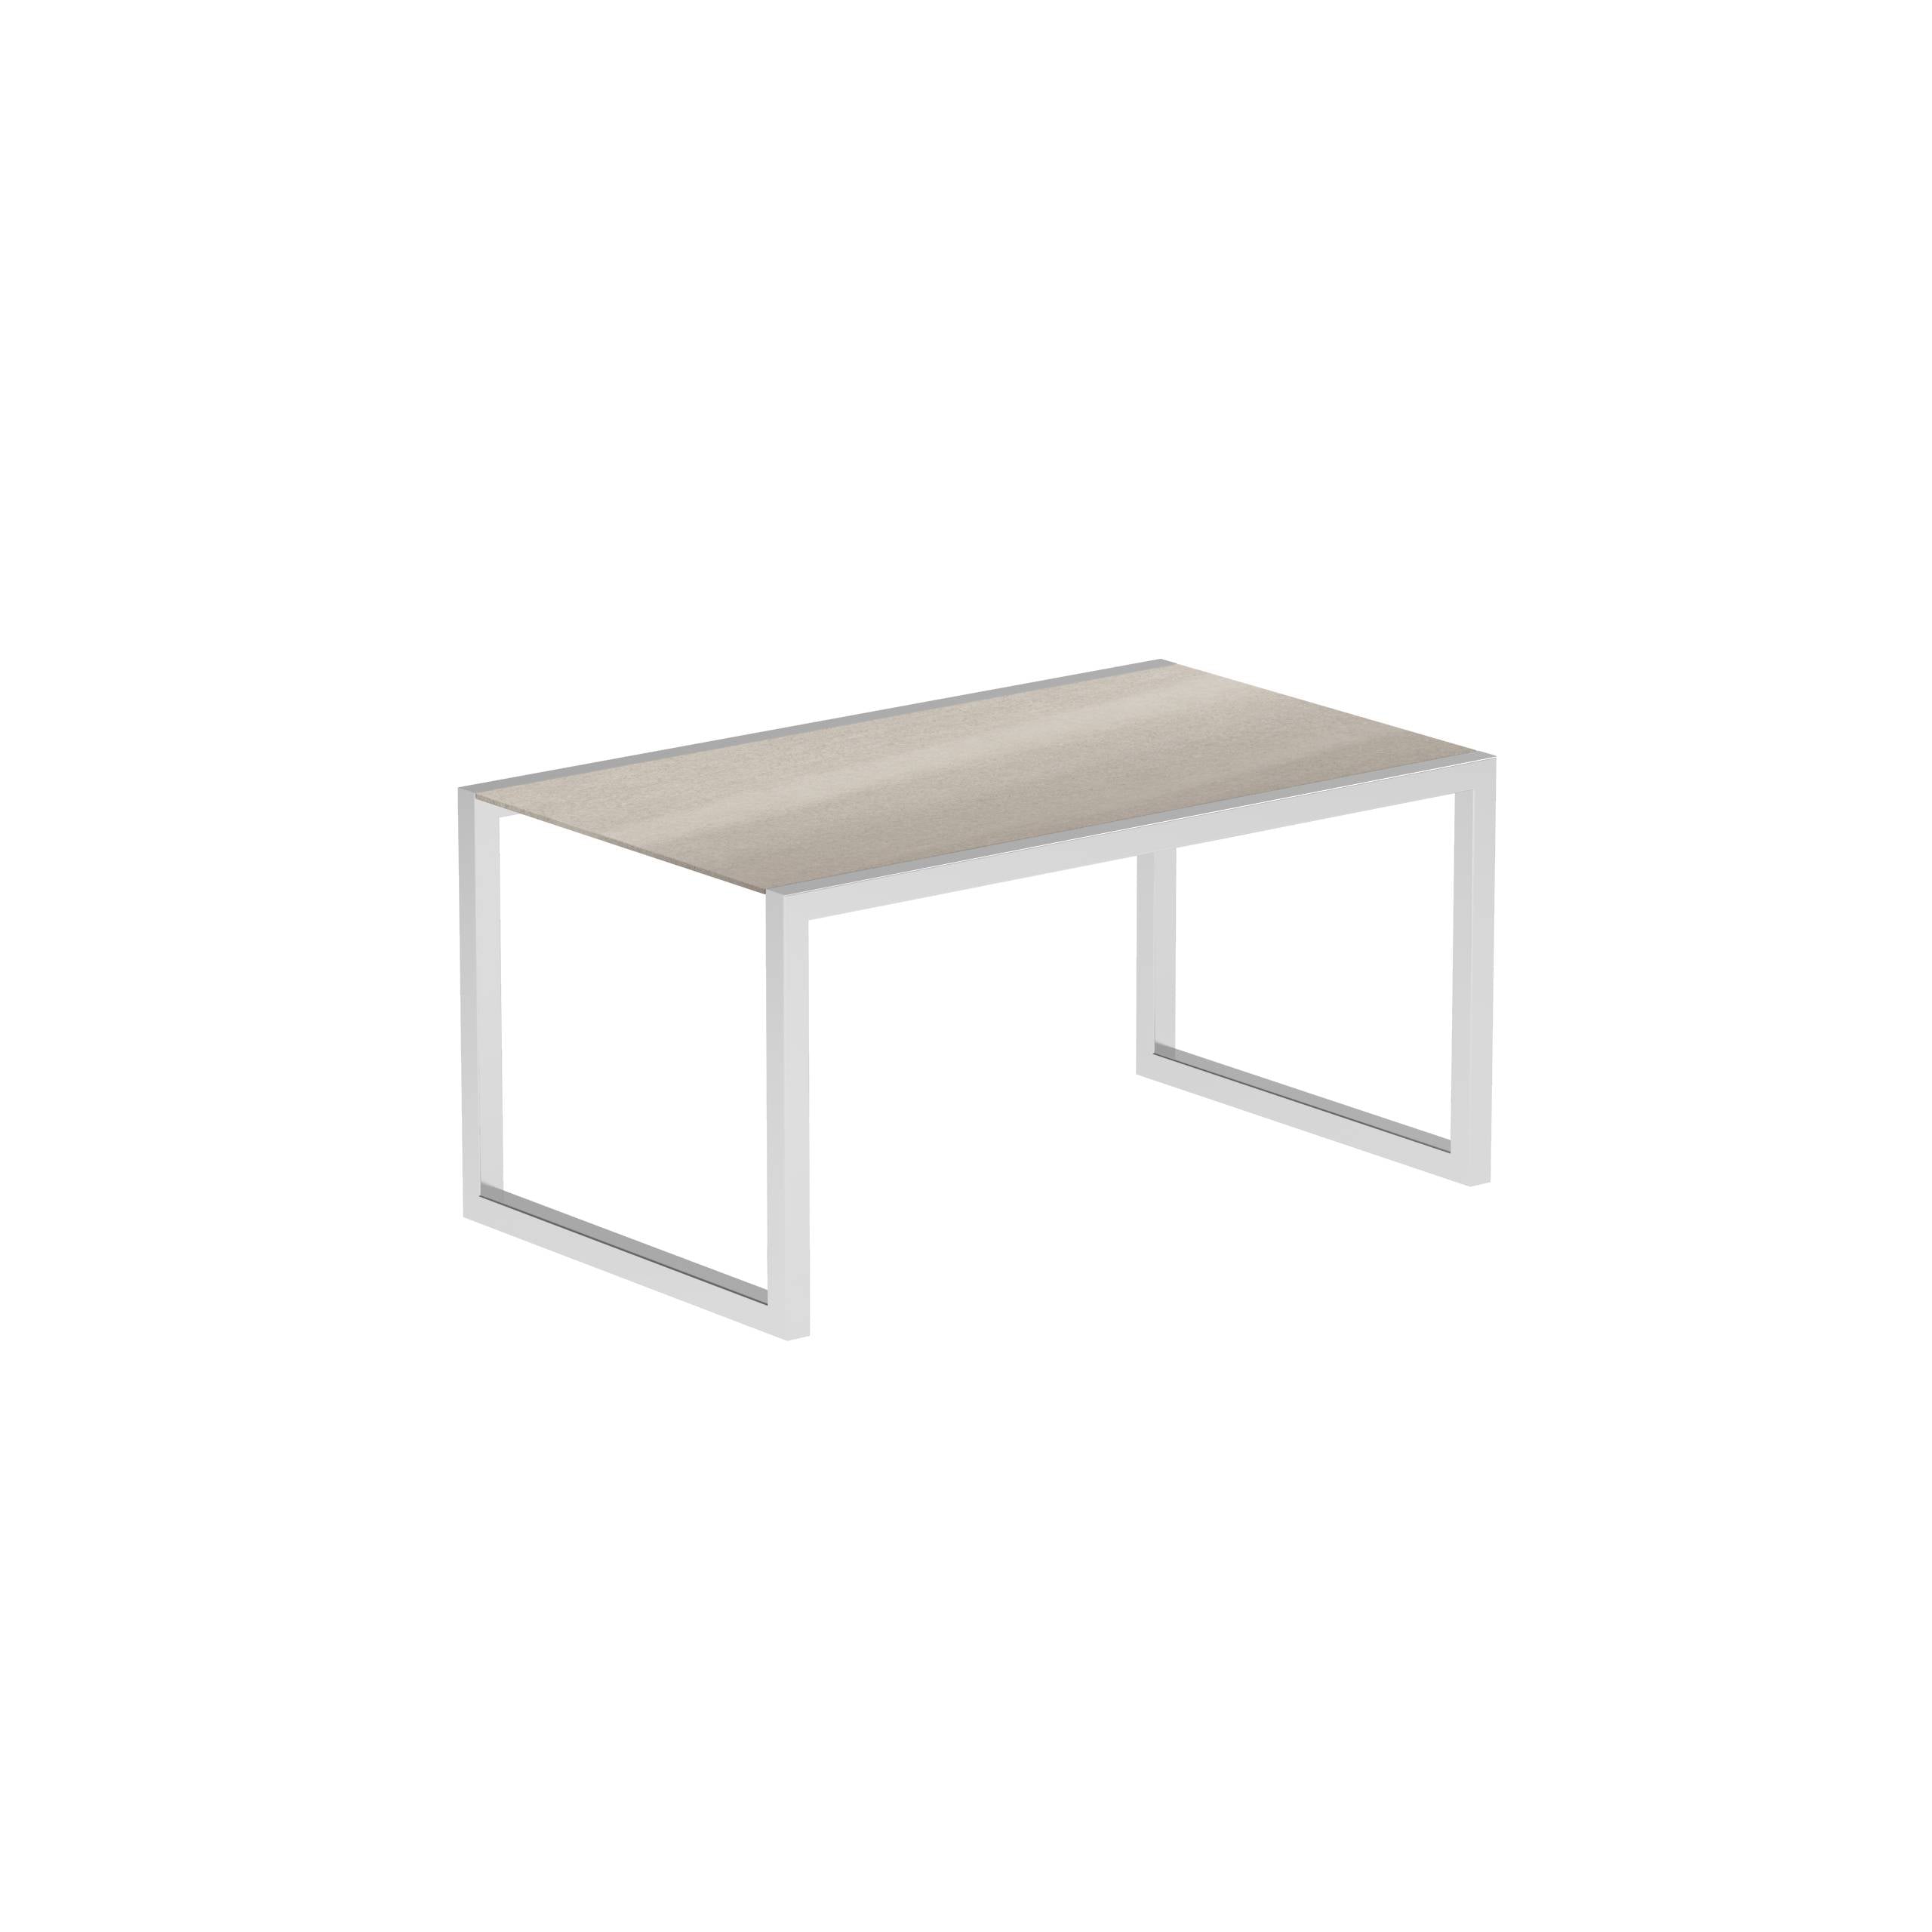 Ninix Table 150x90 Cm With Stainless Steel El.Pol And Ceramic Top Taupe Grey